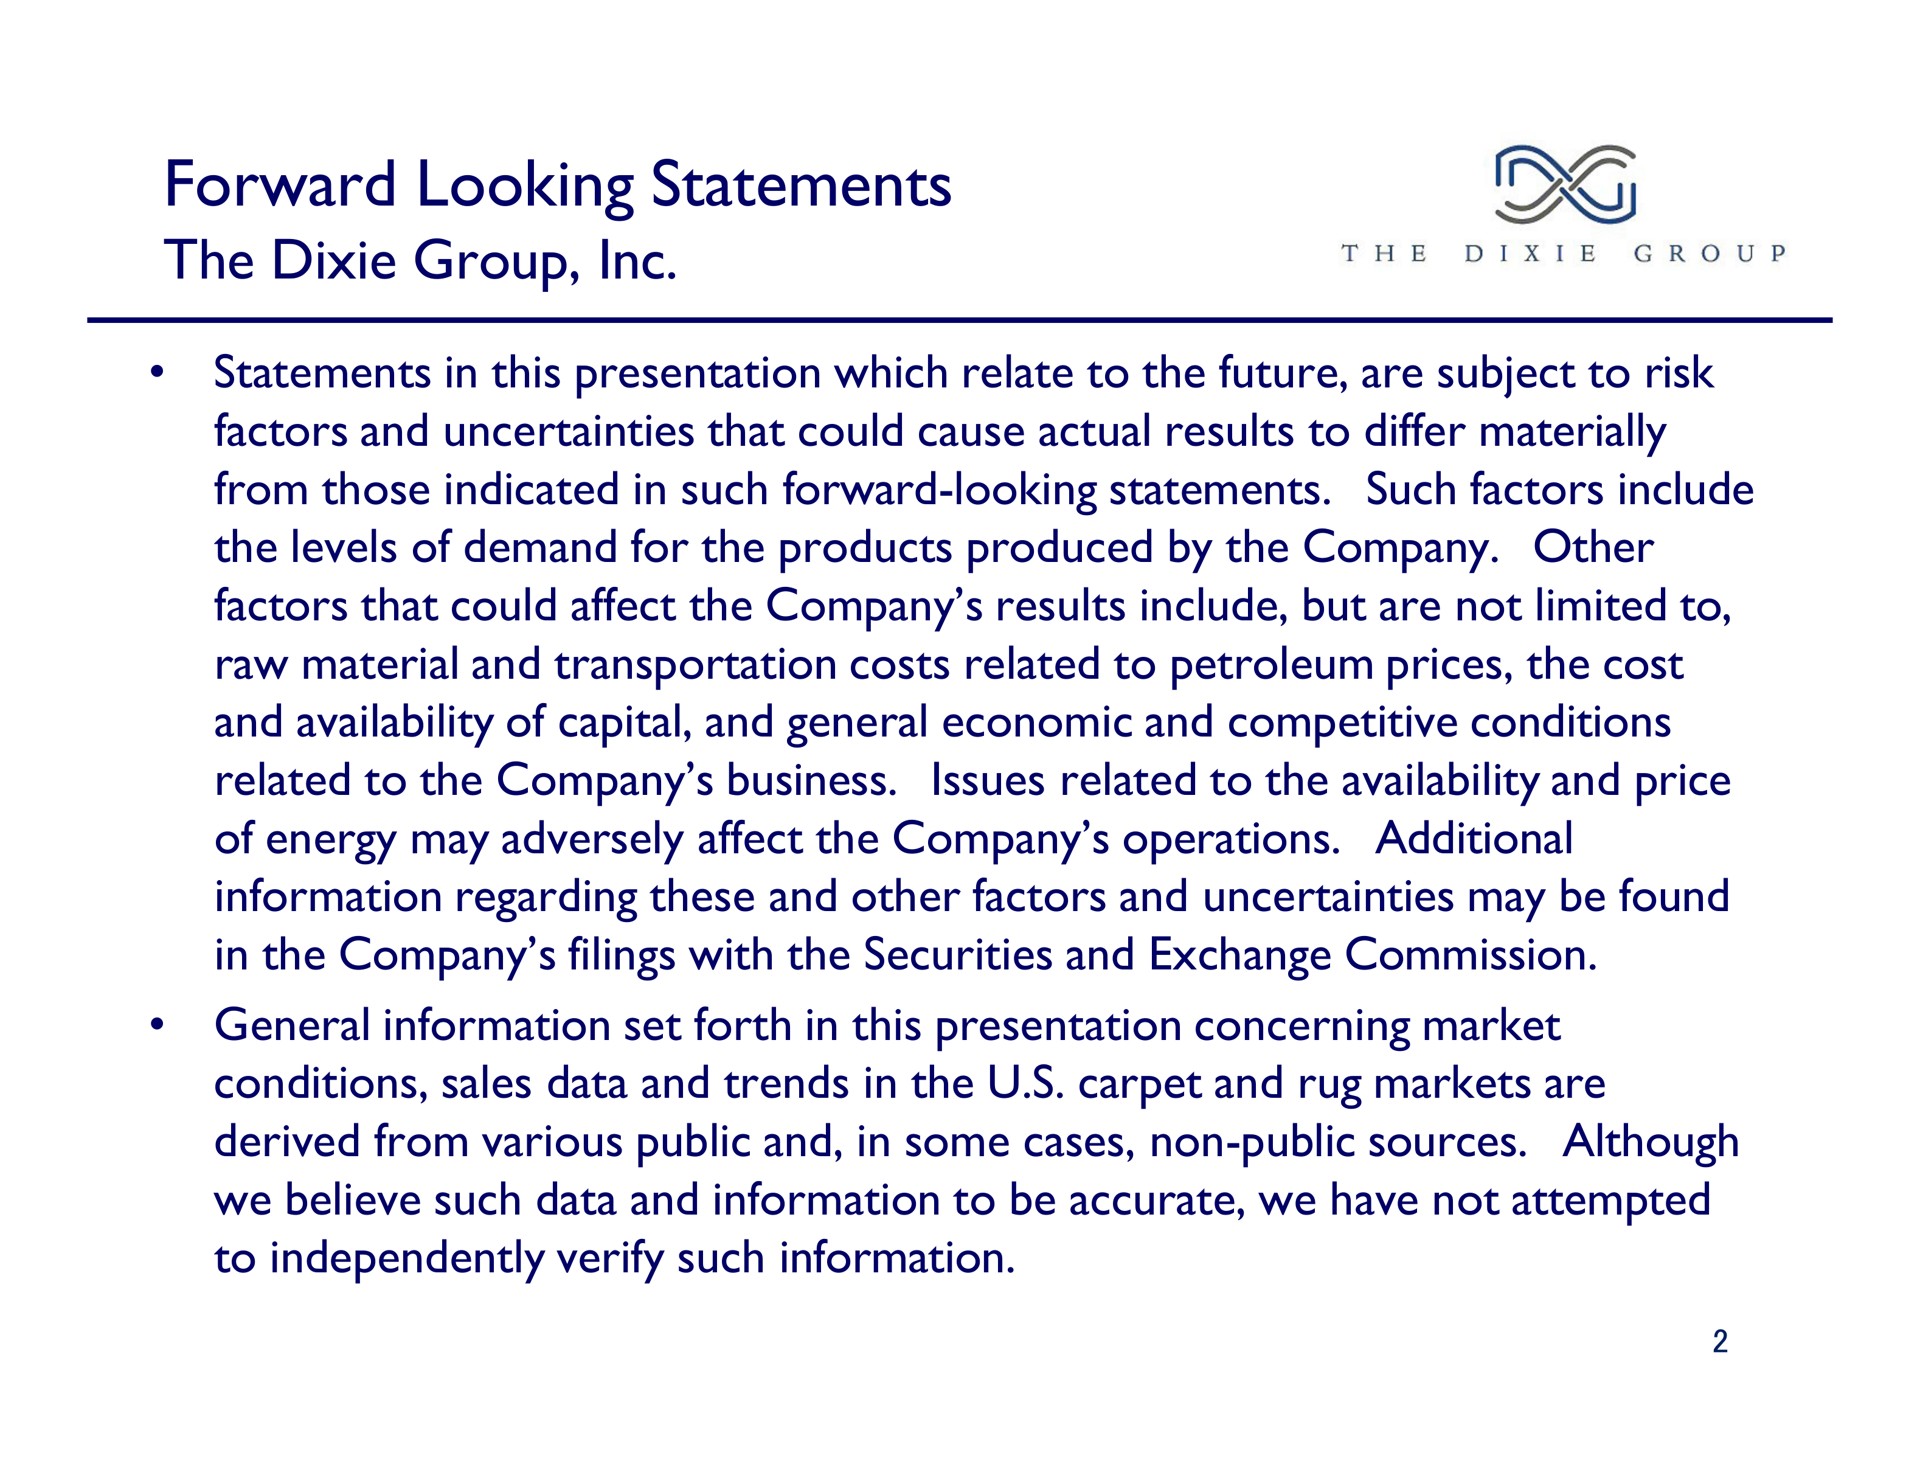 forward looking statements the dixie group a dixie group the | The Dixie Group